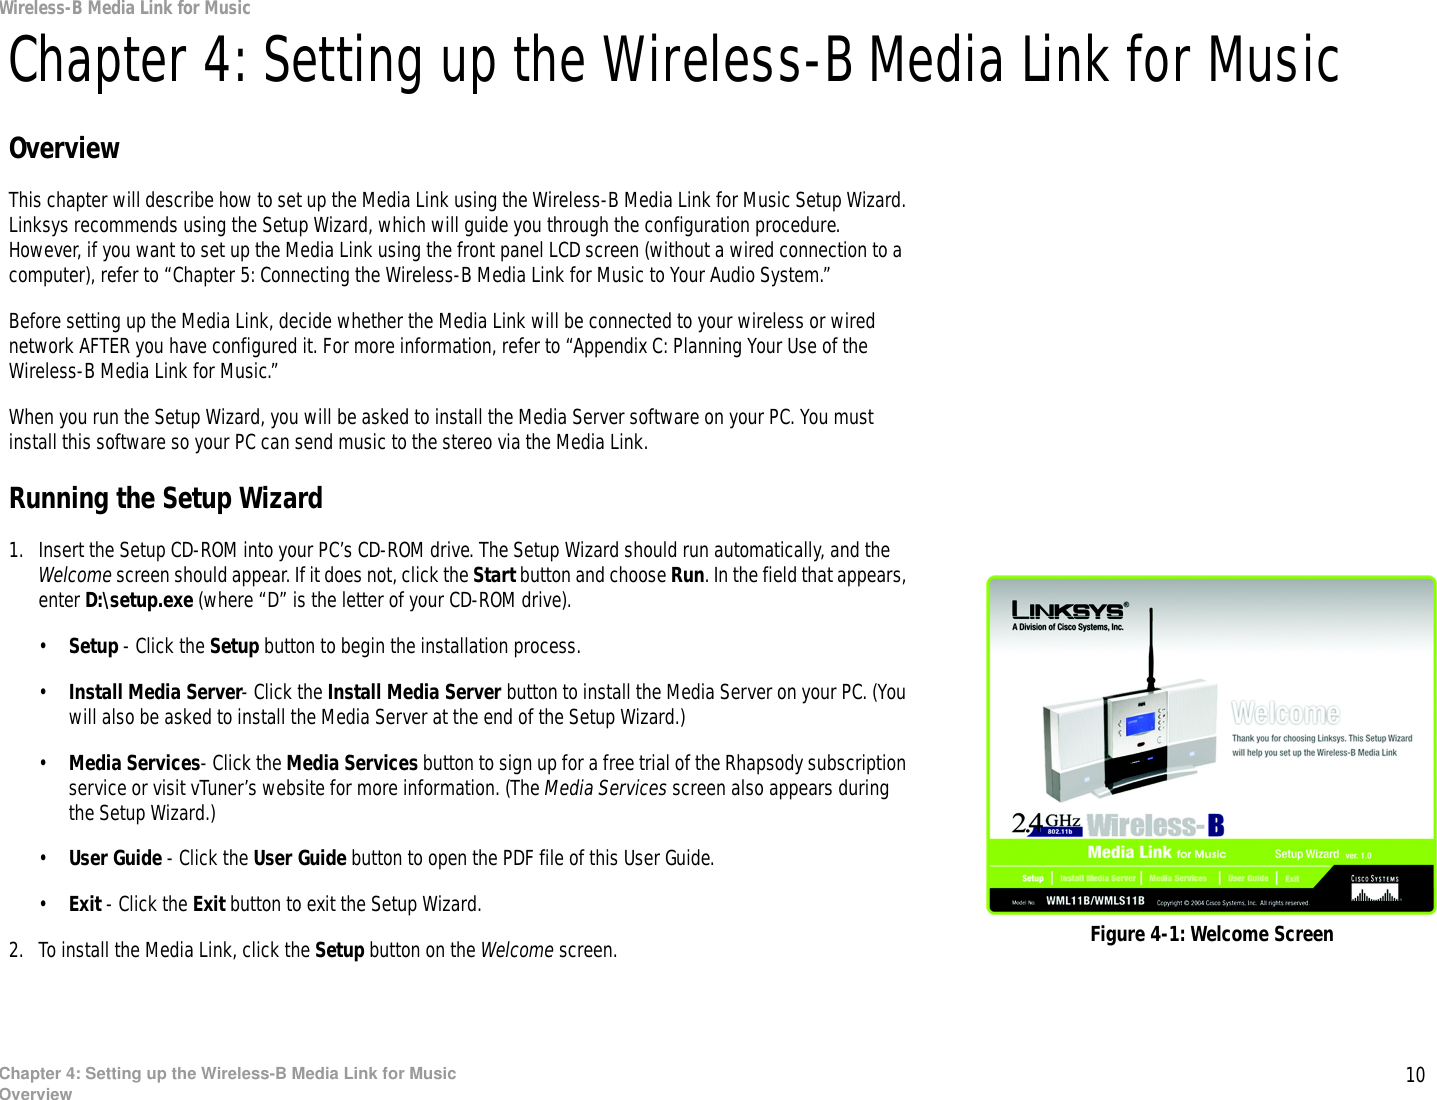 10Chapter 4: Setting up the Wireless-B Media Link for MusicOverviewWireless-B Media Link for MusicChapter 4: Setting up the Wireless-B Media Link for MusicOverviewThis chapter will describe how to set up the Media Link using the Wireless-B Media Link for Music Setup Wizard. Linksys recommends using the Setup Wizard, which will guide you through the configuration procedure. However, if you want to set up the Media Link using the front panel LCD screen (without a wired connection to a computer), refer to “Chapter 5: Connecting the Wireless-B Media Link for Music to Your Audio System.”Before setting up the Media Link, decide whether the Media Link will be connected to your wireless or wired network AFTER you have configured it. For more information, refer to “Appendix C: Planning Your Use of the Wireless-B Media Link for Music.”When you run the Setup Wizard, you will be asked to install the Media Server software on your PC. You must install this software so your PC can send music to the stereo via the Media Link.Running the Setup Wizard1. Insert the Setup CD-ROM into your PC’s CD-ROM drive. The Setup Wizard should run automatically, and the Welcome screen should appear. If it does not, click the Start button and choose Run. In the field that appears, enter D:\setup.exe (where “D” is the letter of your CD-ROM drive).•Setup - Click the Setup button to begin the installation process.•Install Media Server- Click the Install Media Server button to install the Media Server on your PC. (You will also be asked to install the Media Server at the end of the Setup Wizard.)•Media Services- Click the Media Services button to sign up for a free trial of the Rhapsody subscription service or visit vTuner’s website for more information. (The Media Services screen also appears during the Setup Wizard.)•User Guide - Click the User Guide button to open the PDF file of this User Guide.•Exit - Click the Exit button to exit the Setup Wizard.2. To install the Media Link, click the Setup button on the Welcome screen. Figure 4-1: Welcome Screen